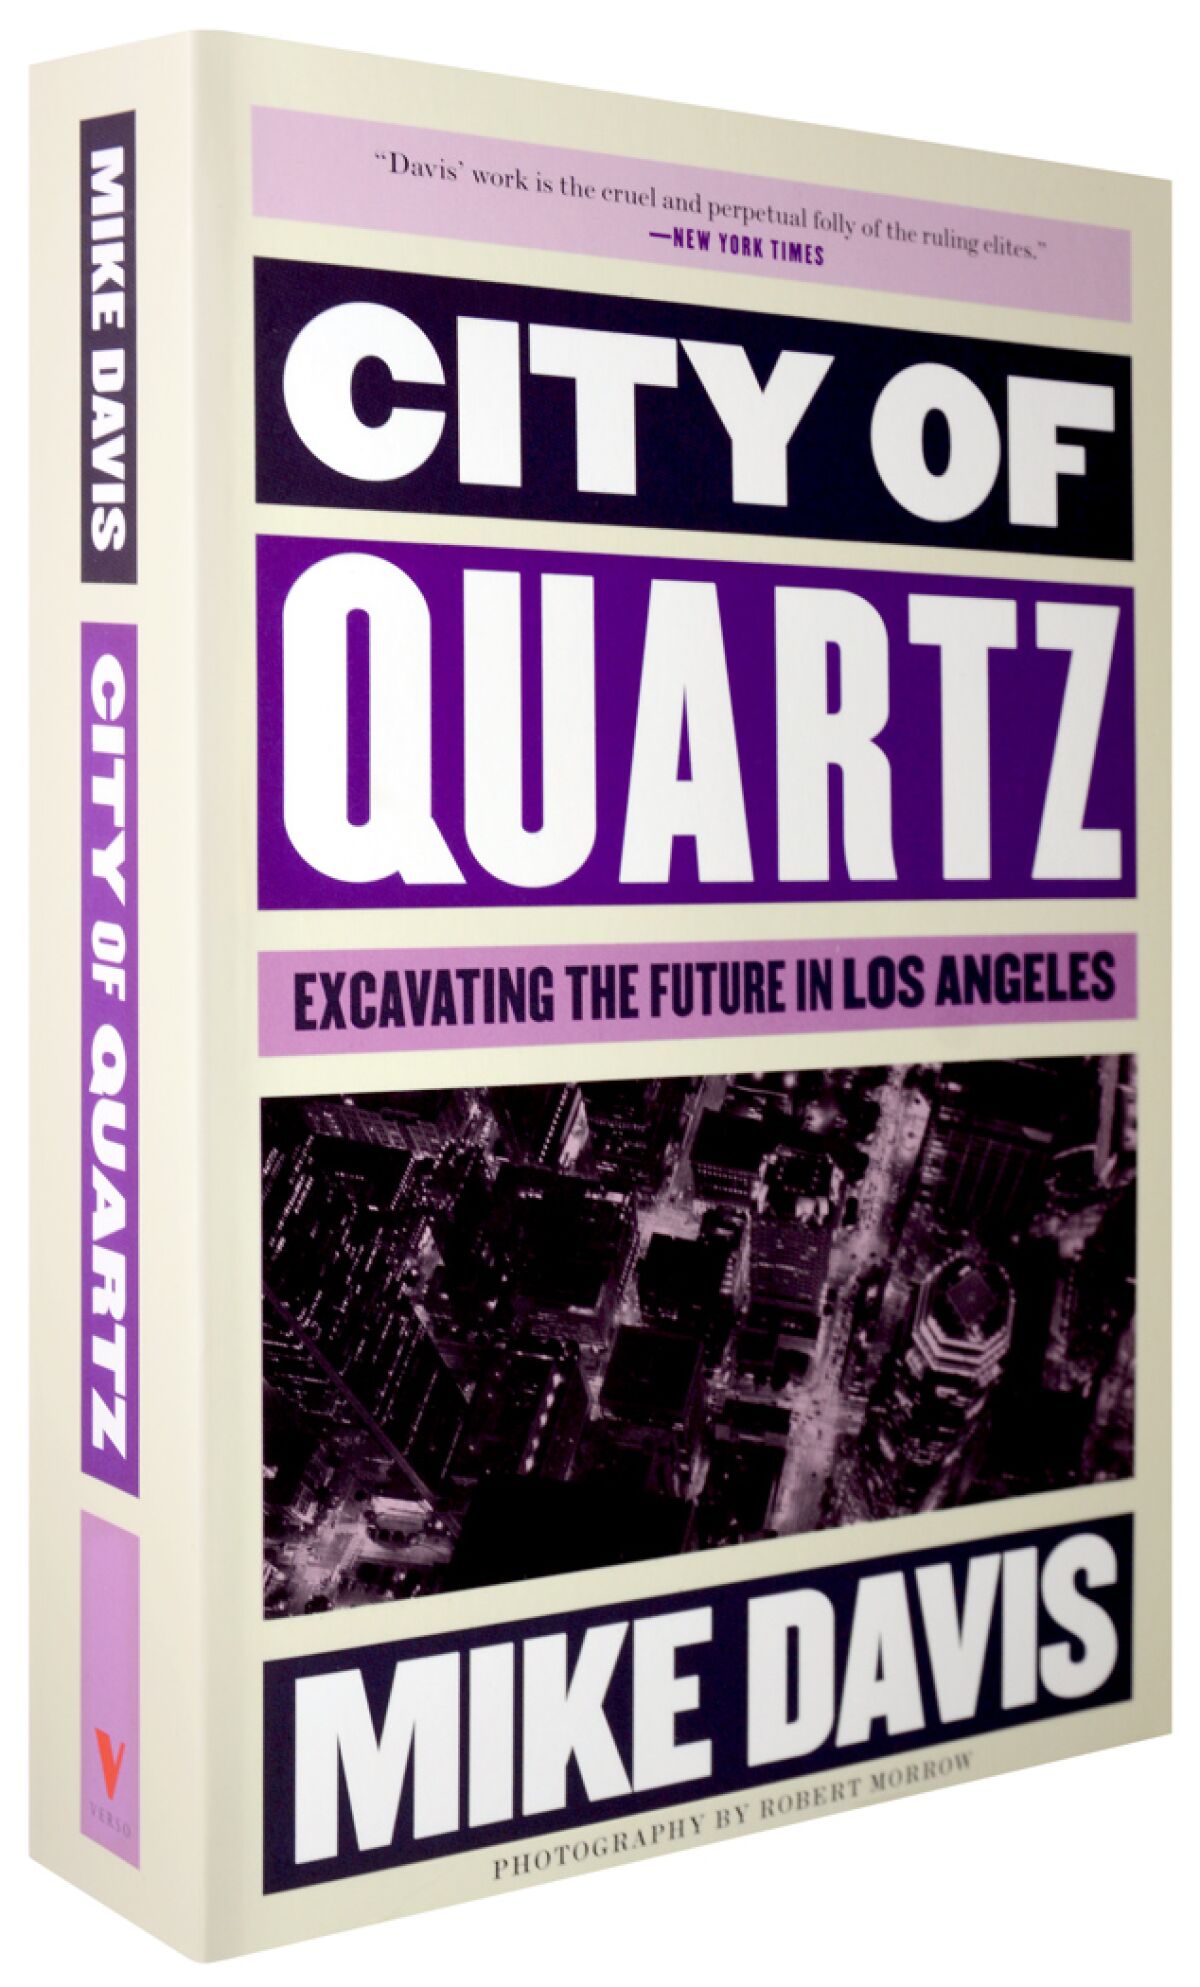 A photo shows the cover of "City of Quartz" with photography and typography in shades of purple.